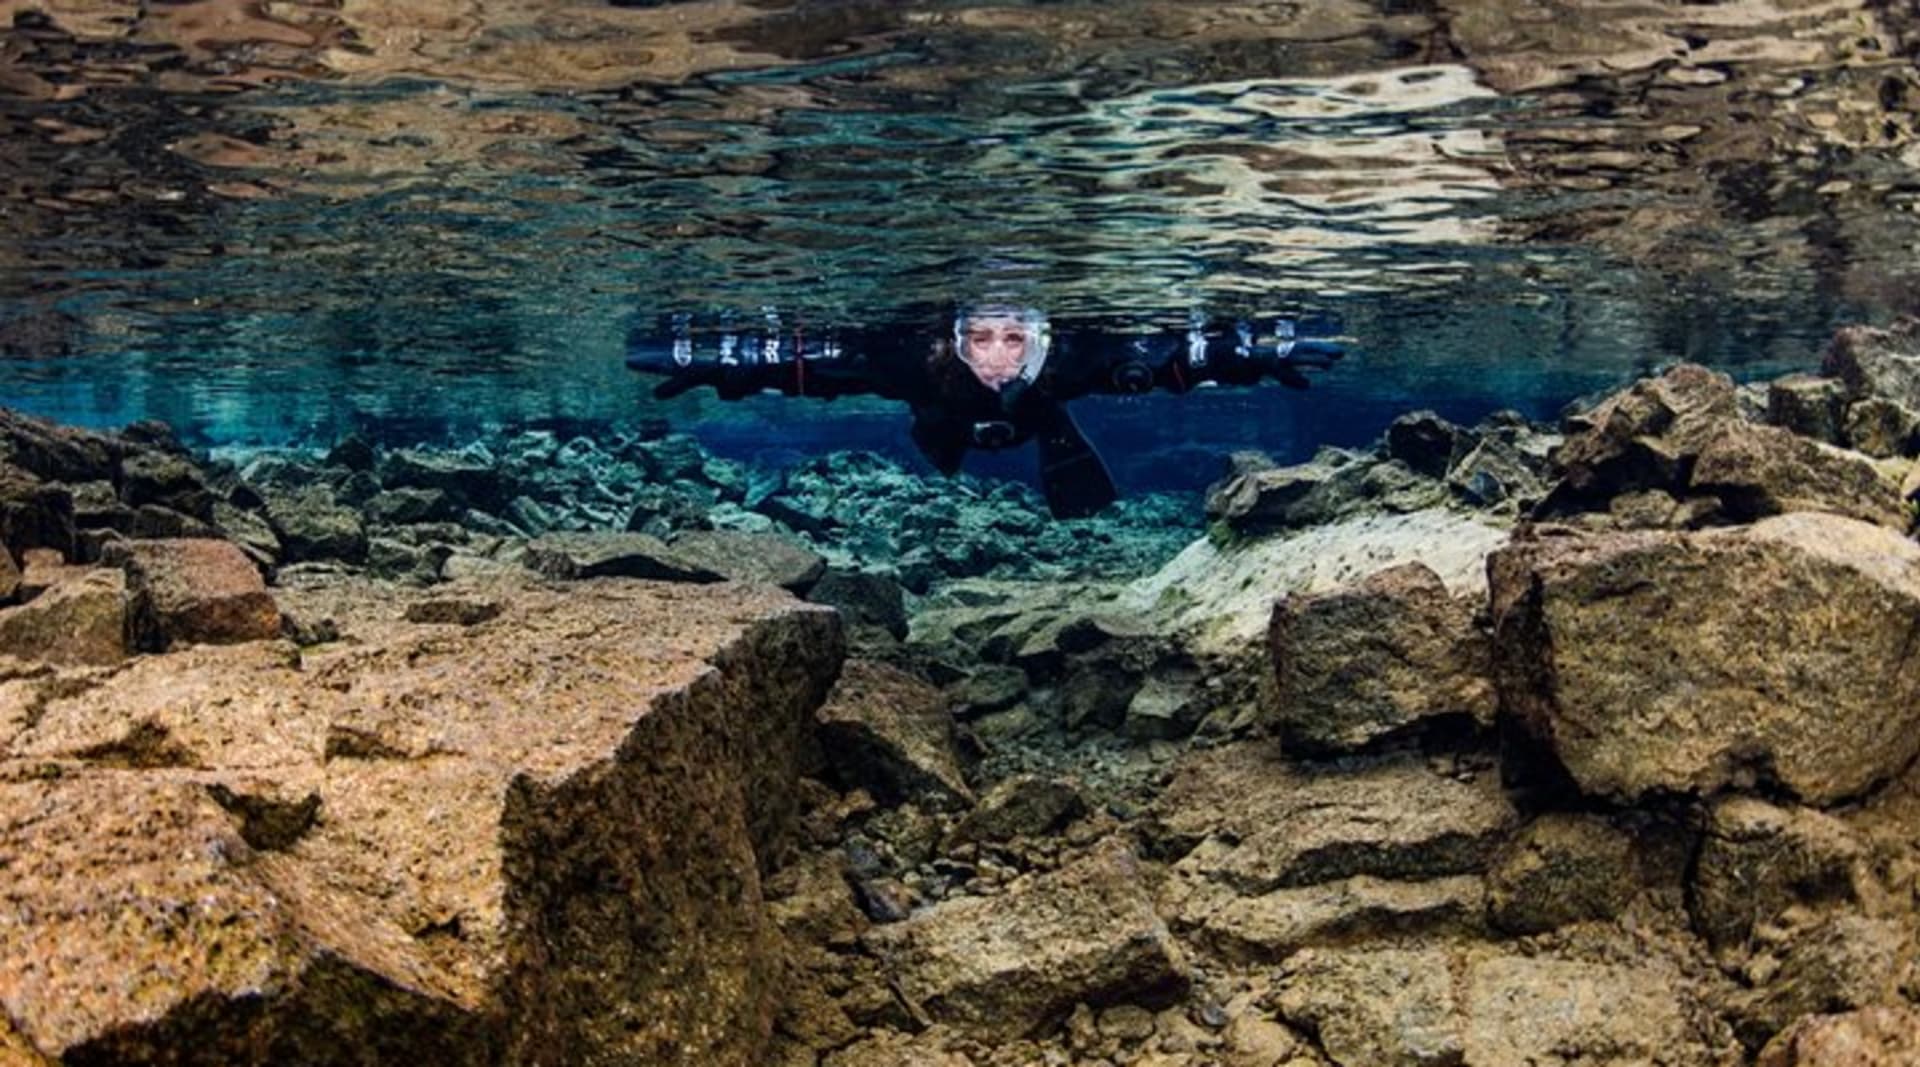 Snorkelers see a whole new world below the surface in Silfra